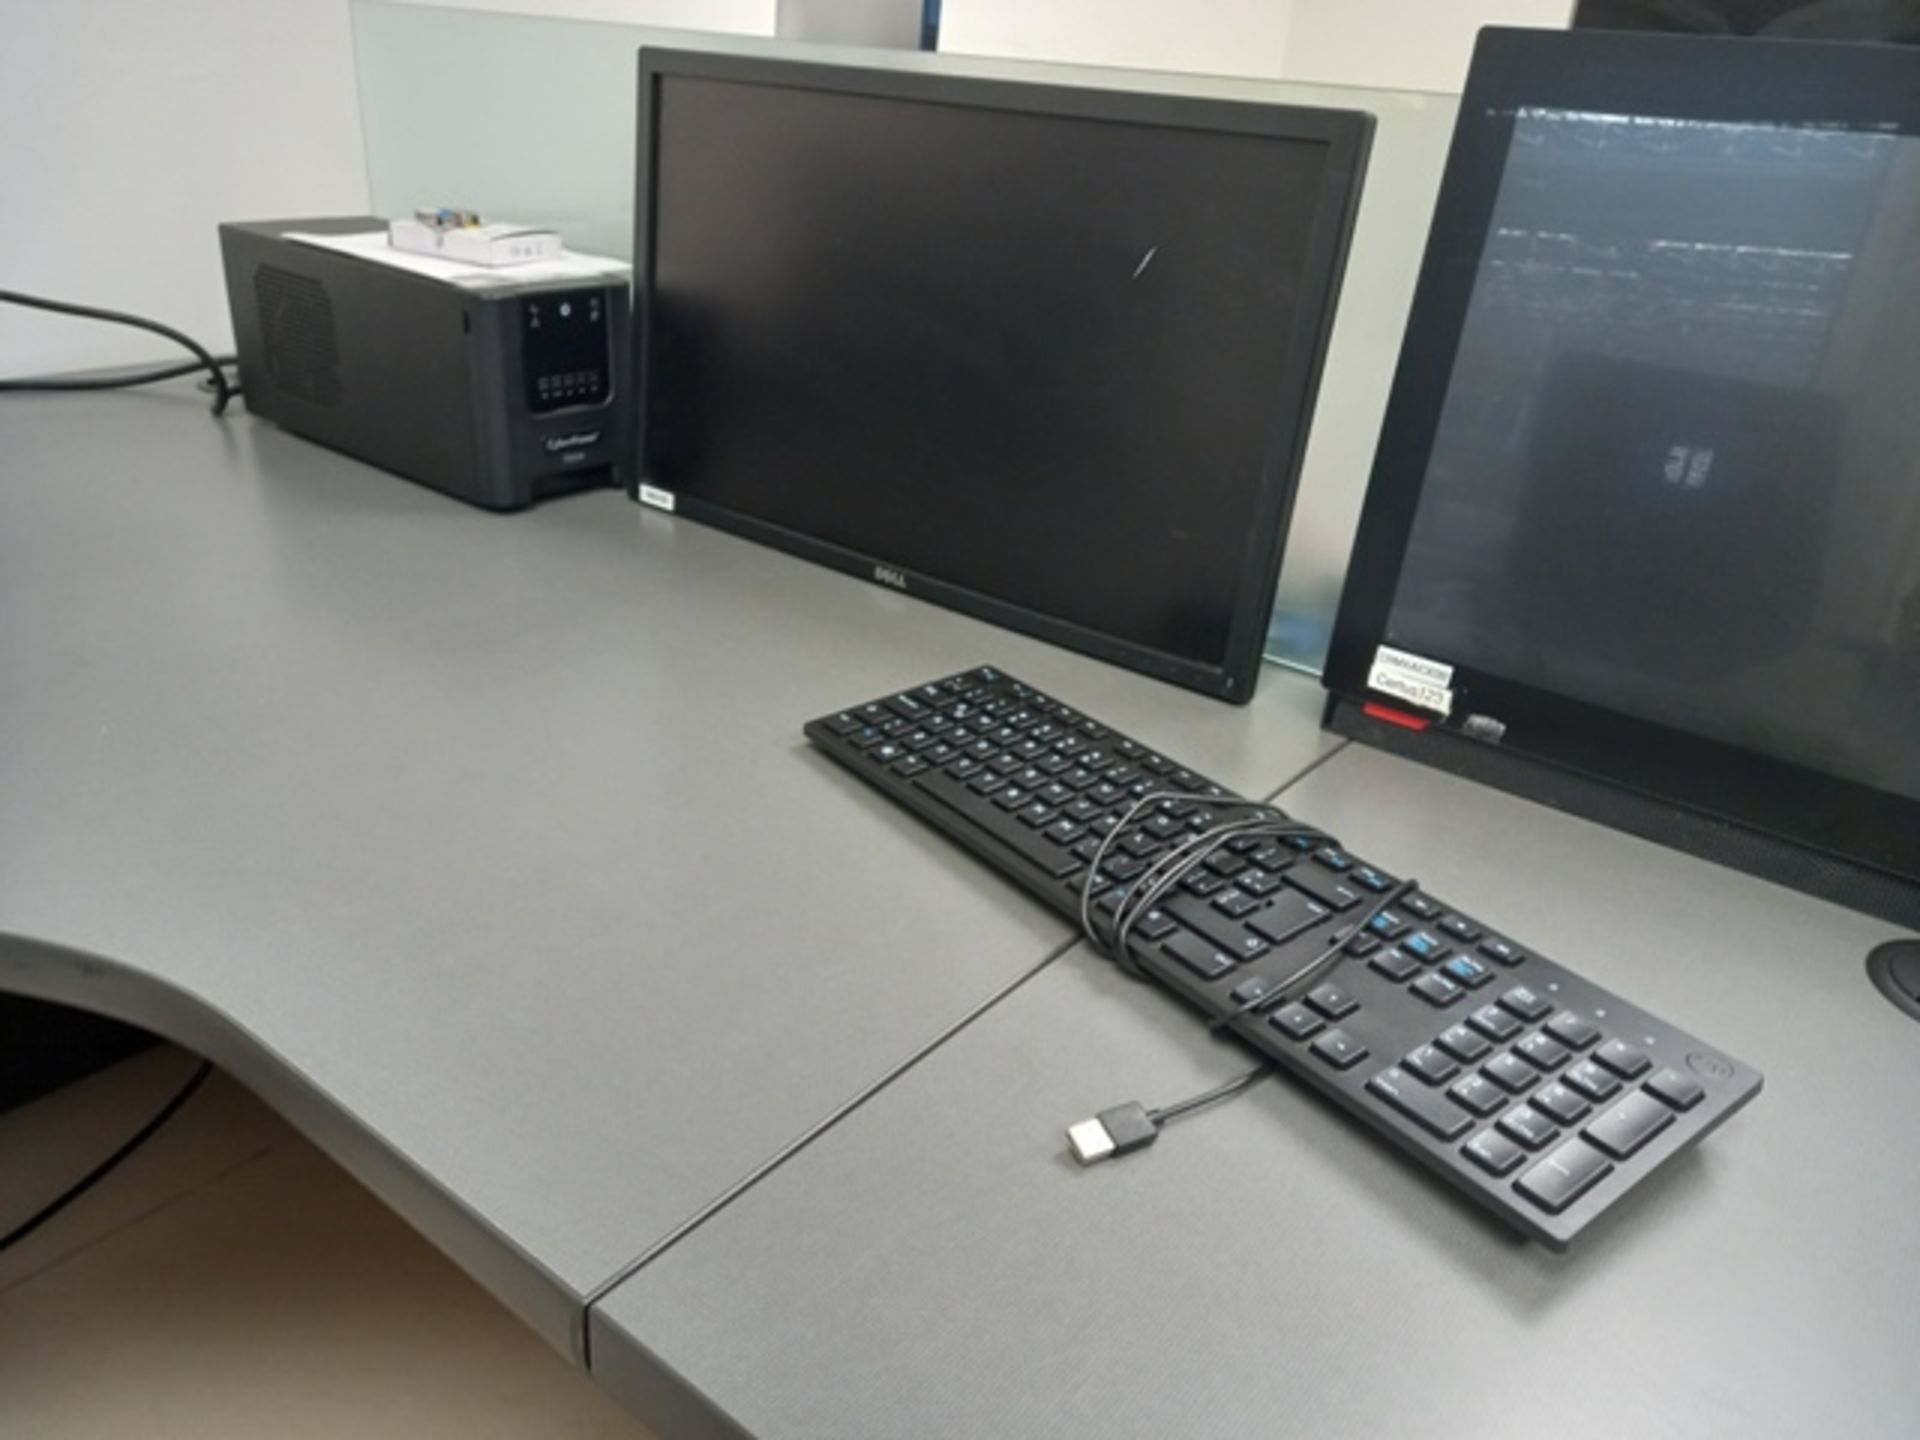 (29) Pcs Office Furniture and Computer Equipment Consisting of: (2) 2 Person Work Stations and more - Image 17 of 33